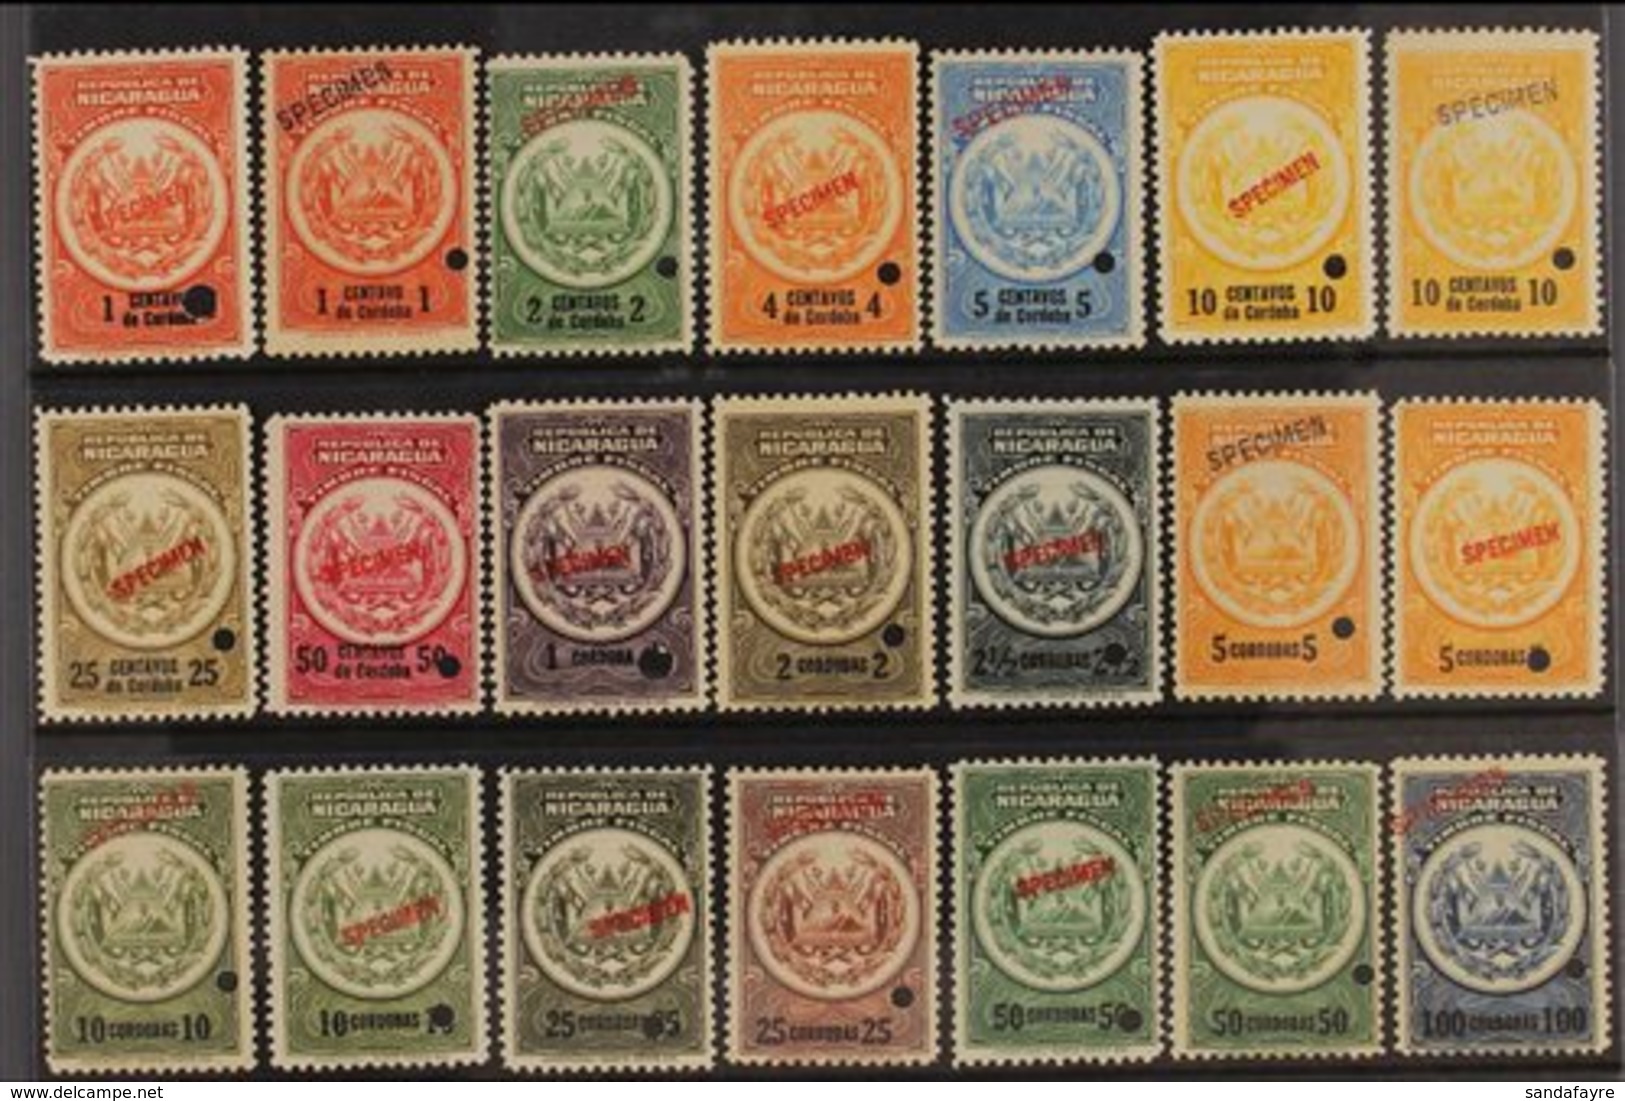 REVENUES TIMBRE FISCAL 1920 All Different Group With Values To 100cor, All With "SPECIMEN" Overprints & Small Security P - Nicaragua